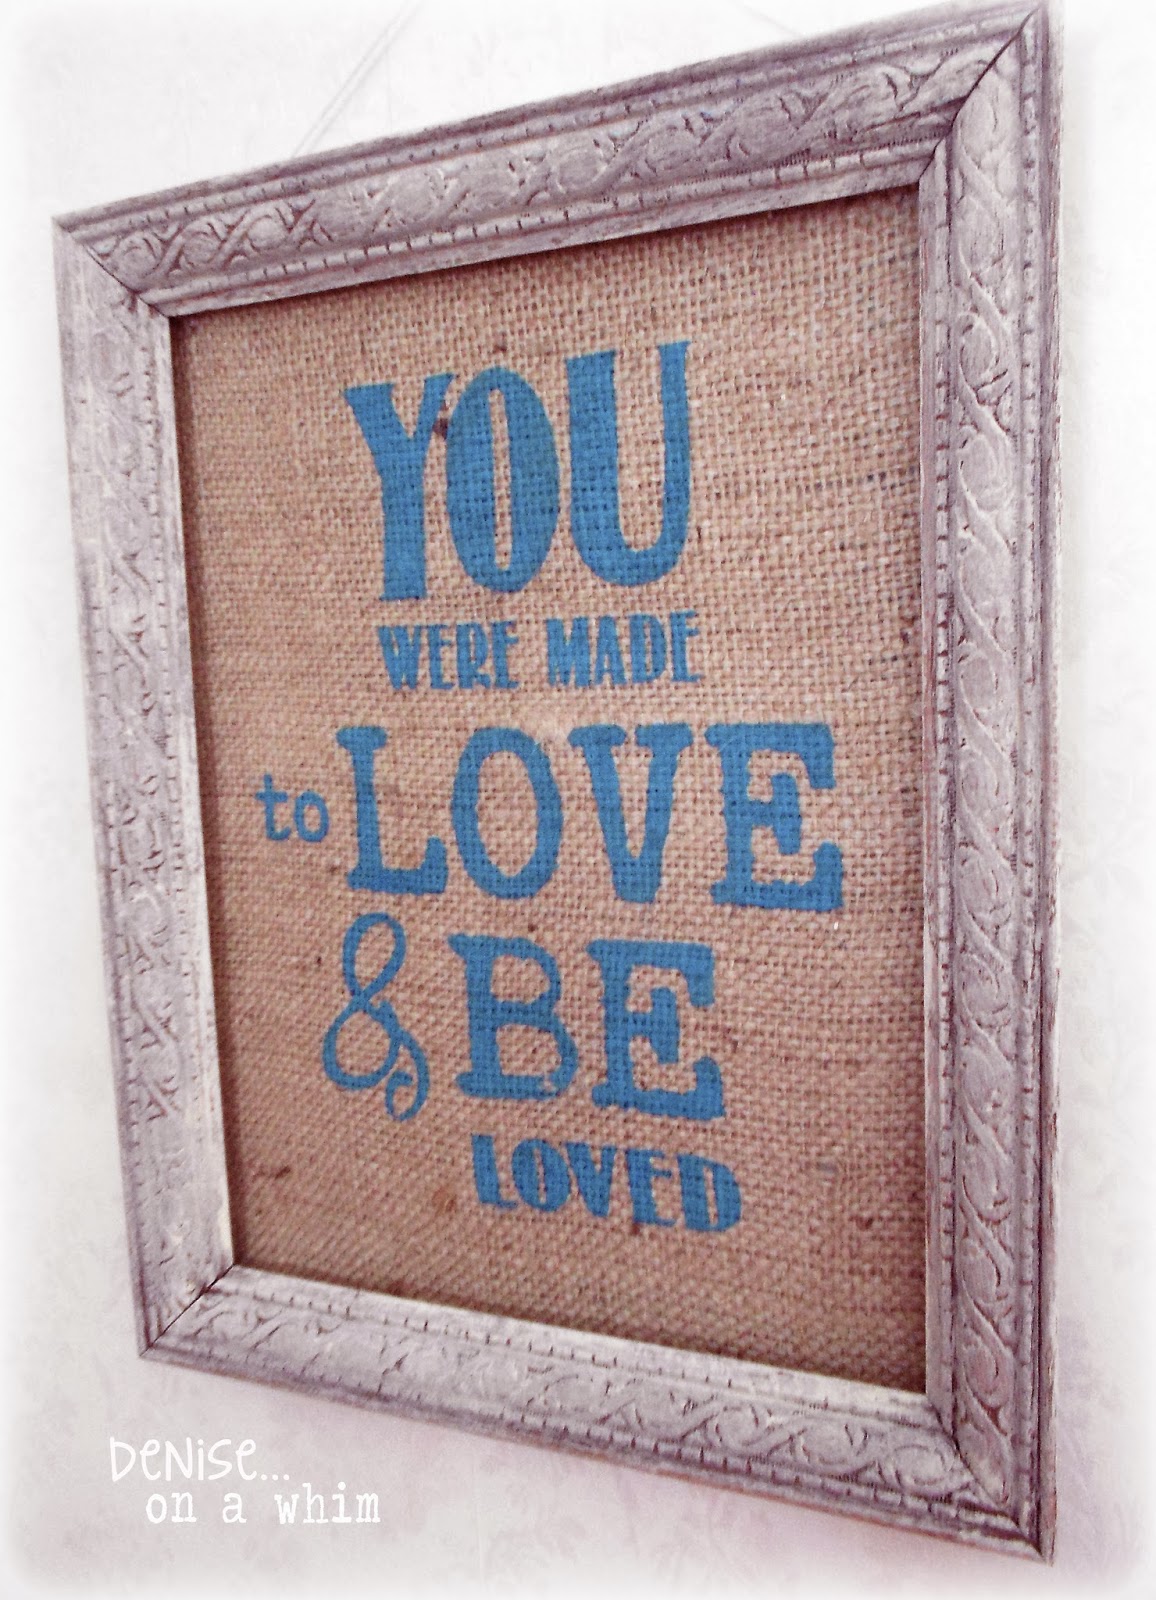 Peacock Chalk Paint on Burlap in a Pretty Cream Frame for Valentine's Day via http://deniseonawhim.blogspot.com